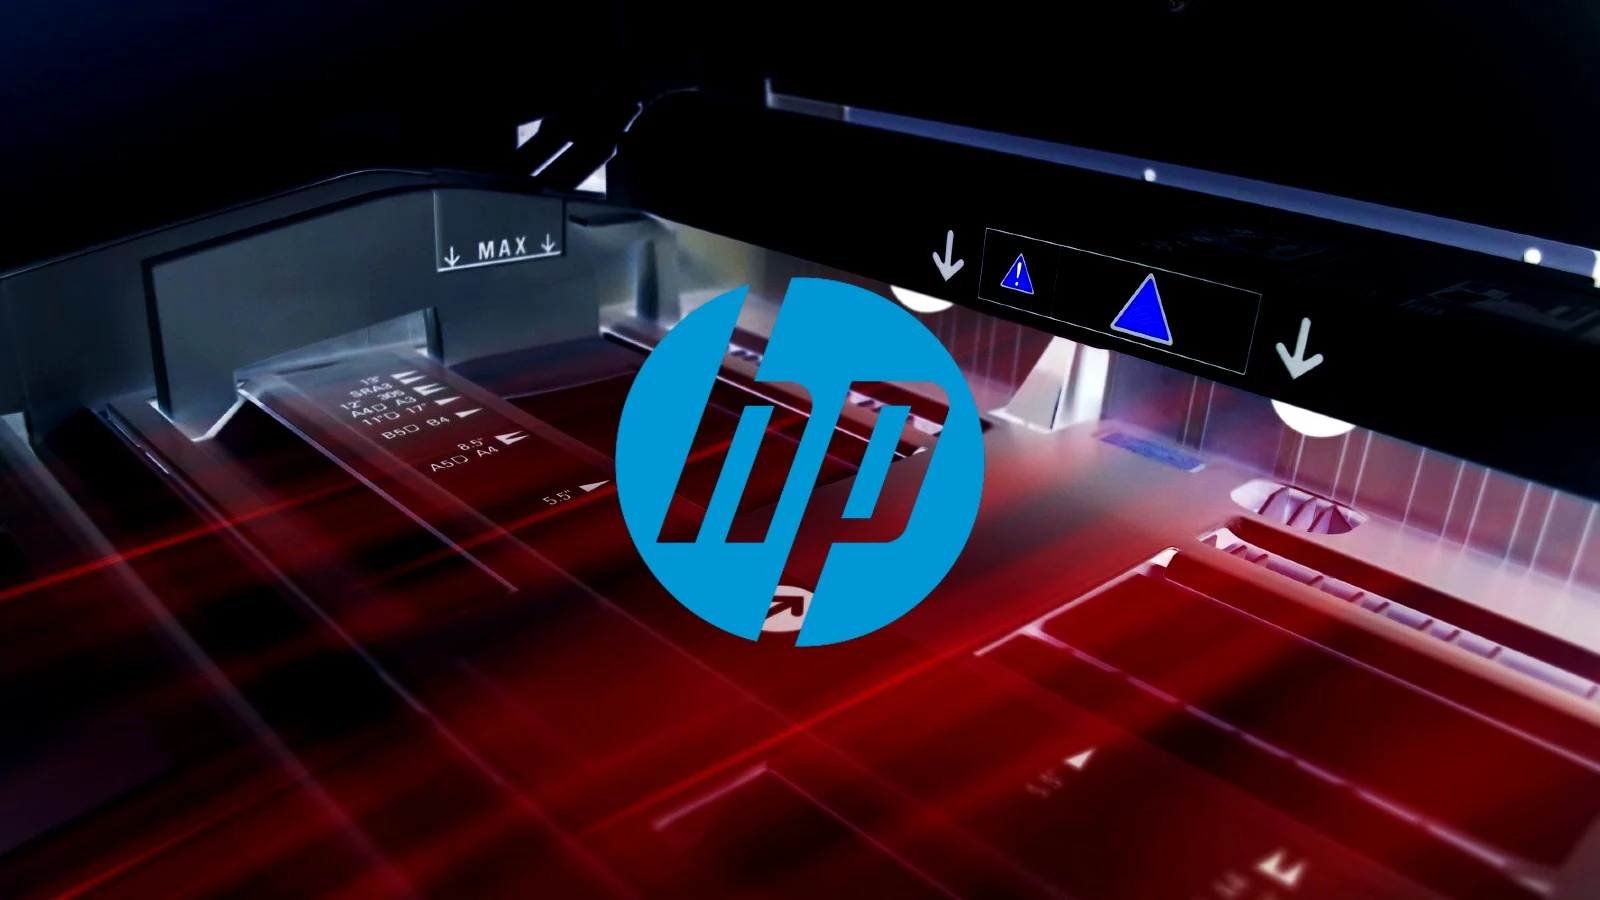 takian.ir hp to patch critical bug in laserjet printers within 90 days